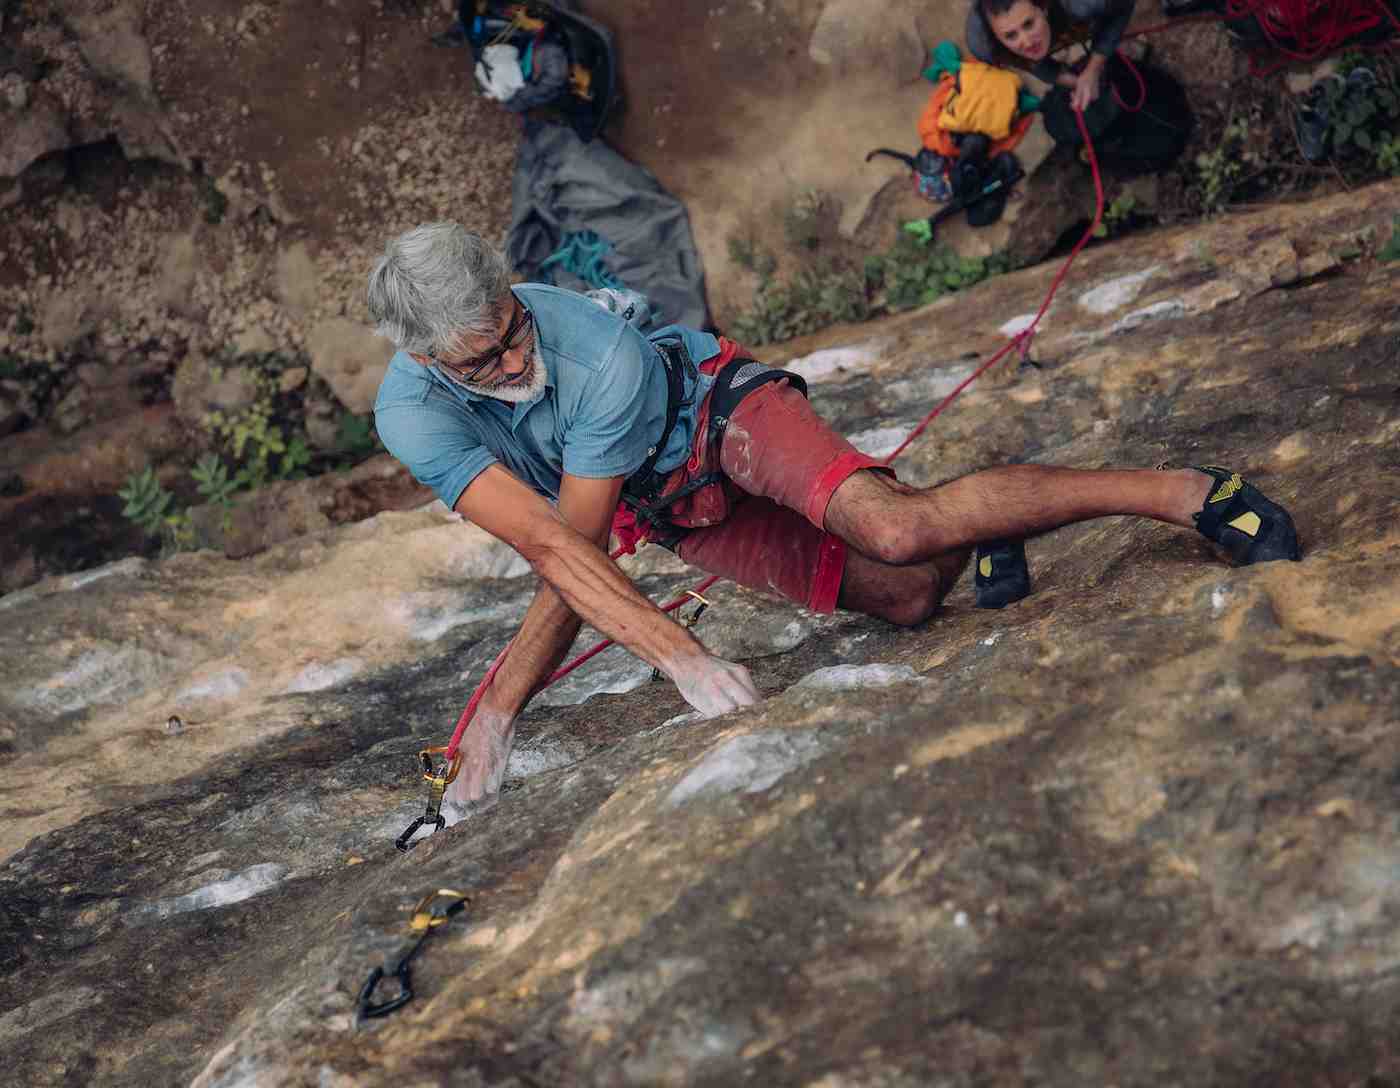 Climbing injury prevention: how to train before a climbing trip